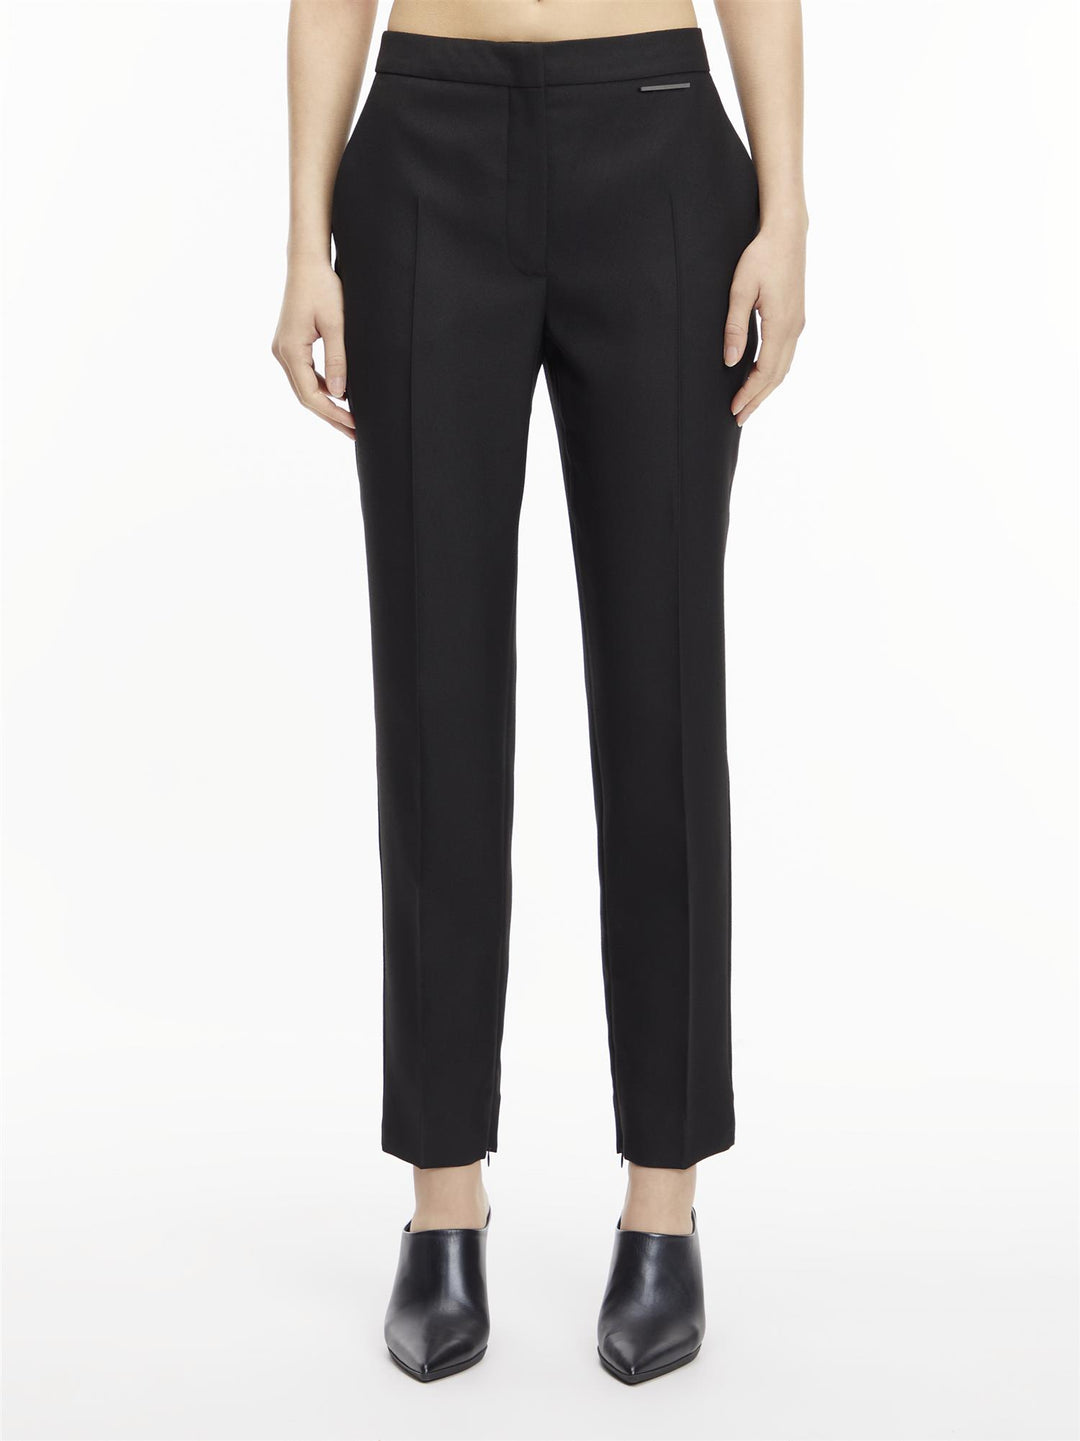 CALVIN KLEIN - ESS SLIM TAPERED ANKLE PANT - Dale